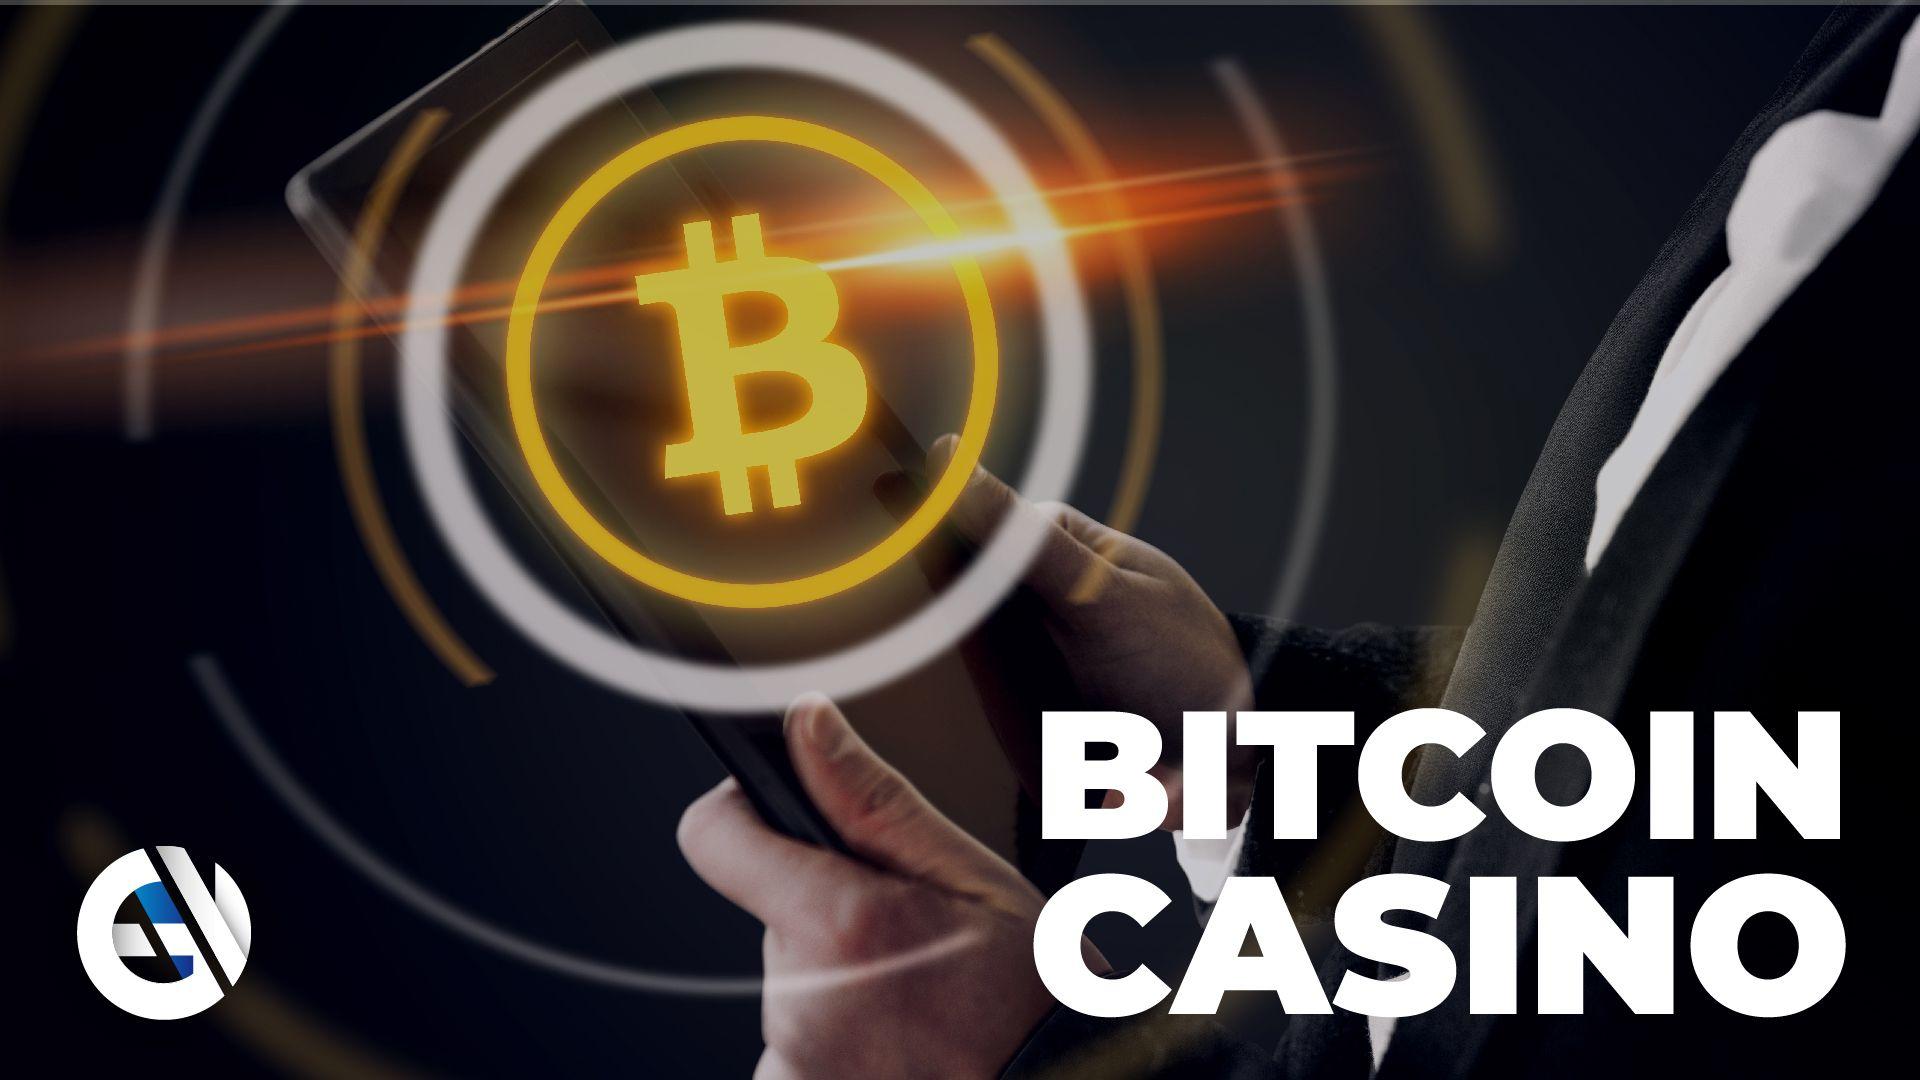 Best Bitcoin Casinos UK - List of Top Crypto Casinos for UK Players